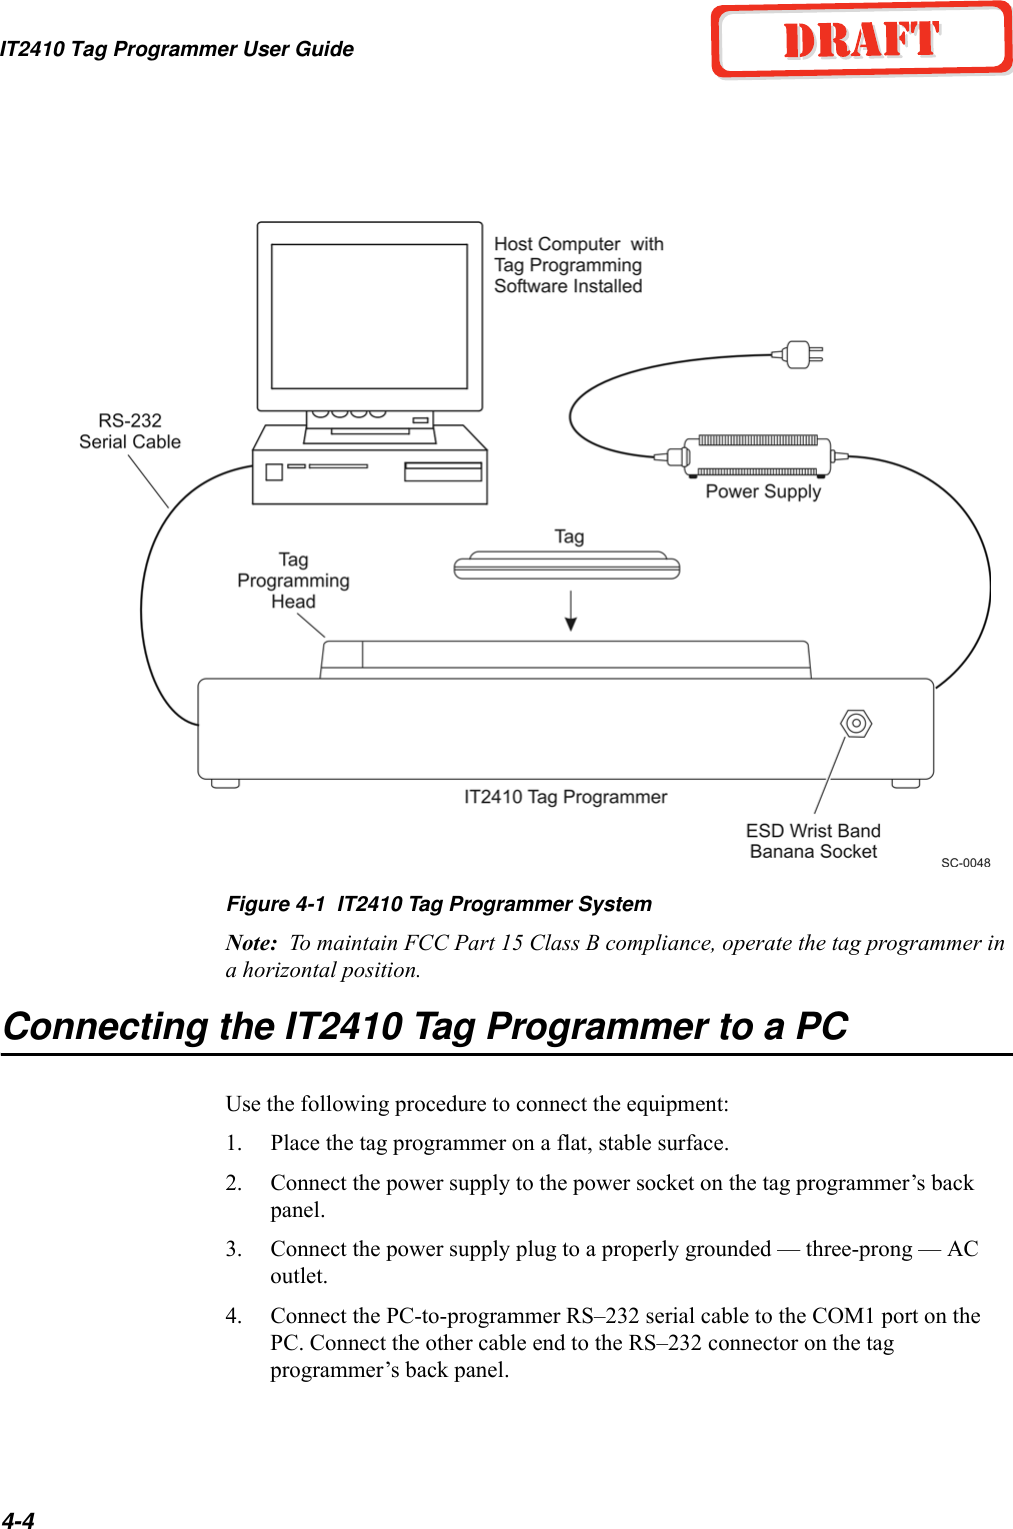 IT2410 Tag Programmer User Guide4-4Figure 4-1  IT2410 Tag Programmer SystemNote:  To maintain FCC Part 15 Class B compliance, operate the tag programmer in a horizontal position.Connecting the IT2410 Tag Programmer to a PCUse the following procedure to connect the equipment:1. Place the tag programmer on a flat, stable surface.2. Connect the power supply to the power socket on the tag programmer’s back panel.3. Connect the power supply plug to a properly grounded — three-prong — AC outlet.4. Connect the PC-to-programmer RS–232 serial cable to the COM1 port on the PC. Connect the other cable end to the RS–232 connector on the tag programmer’s back panel.